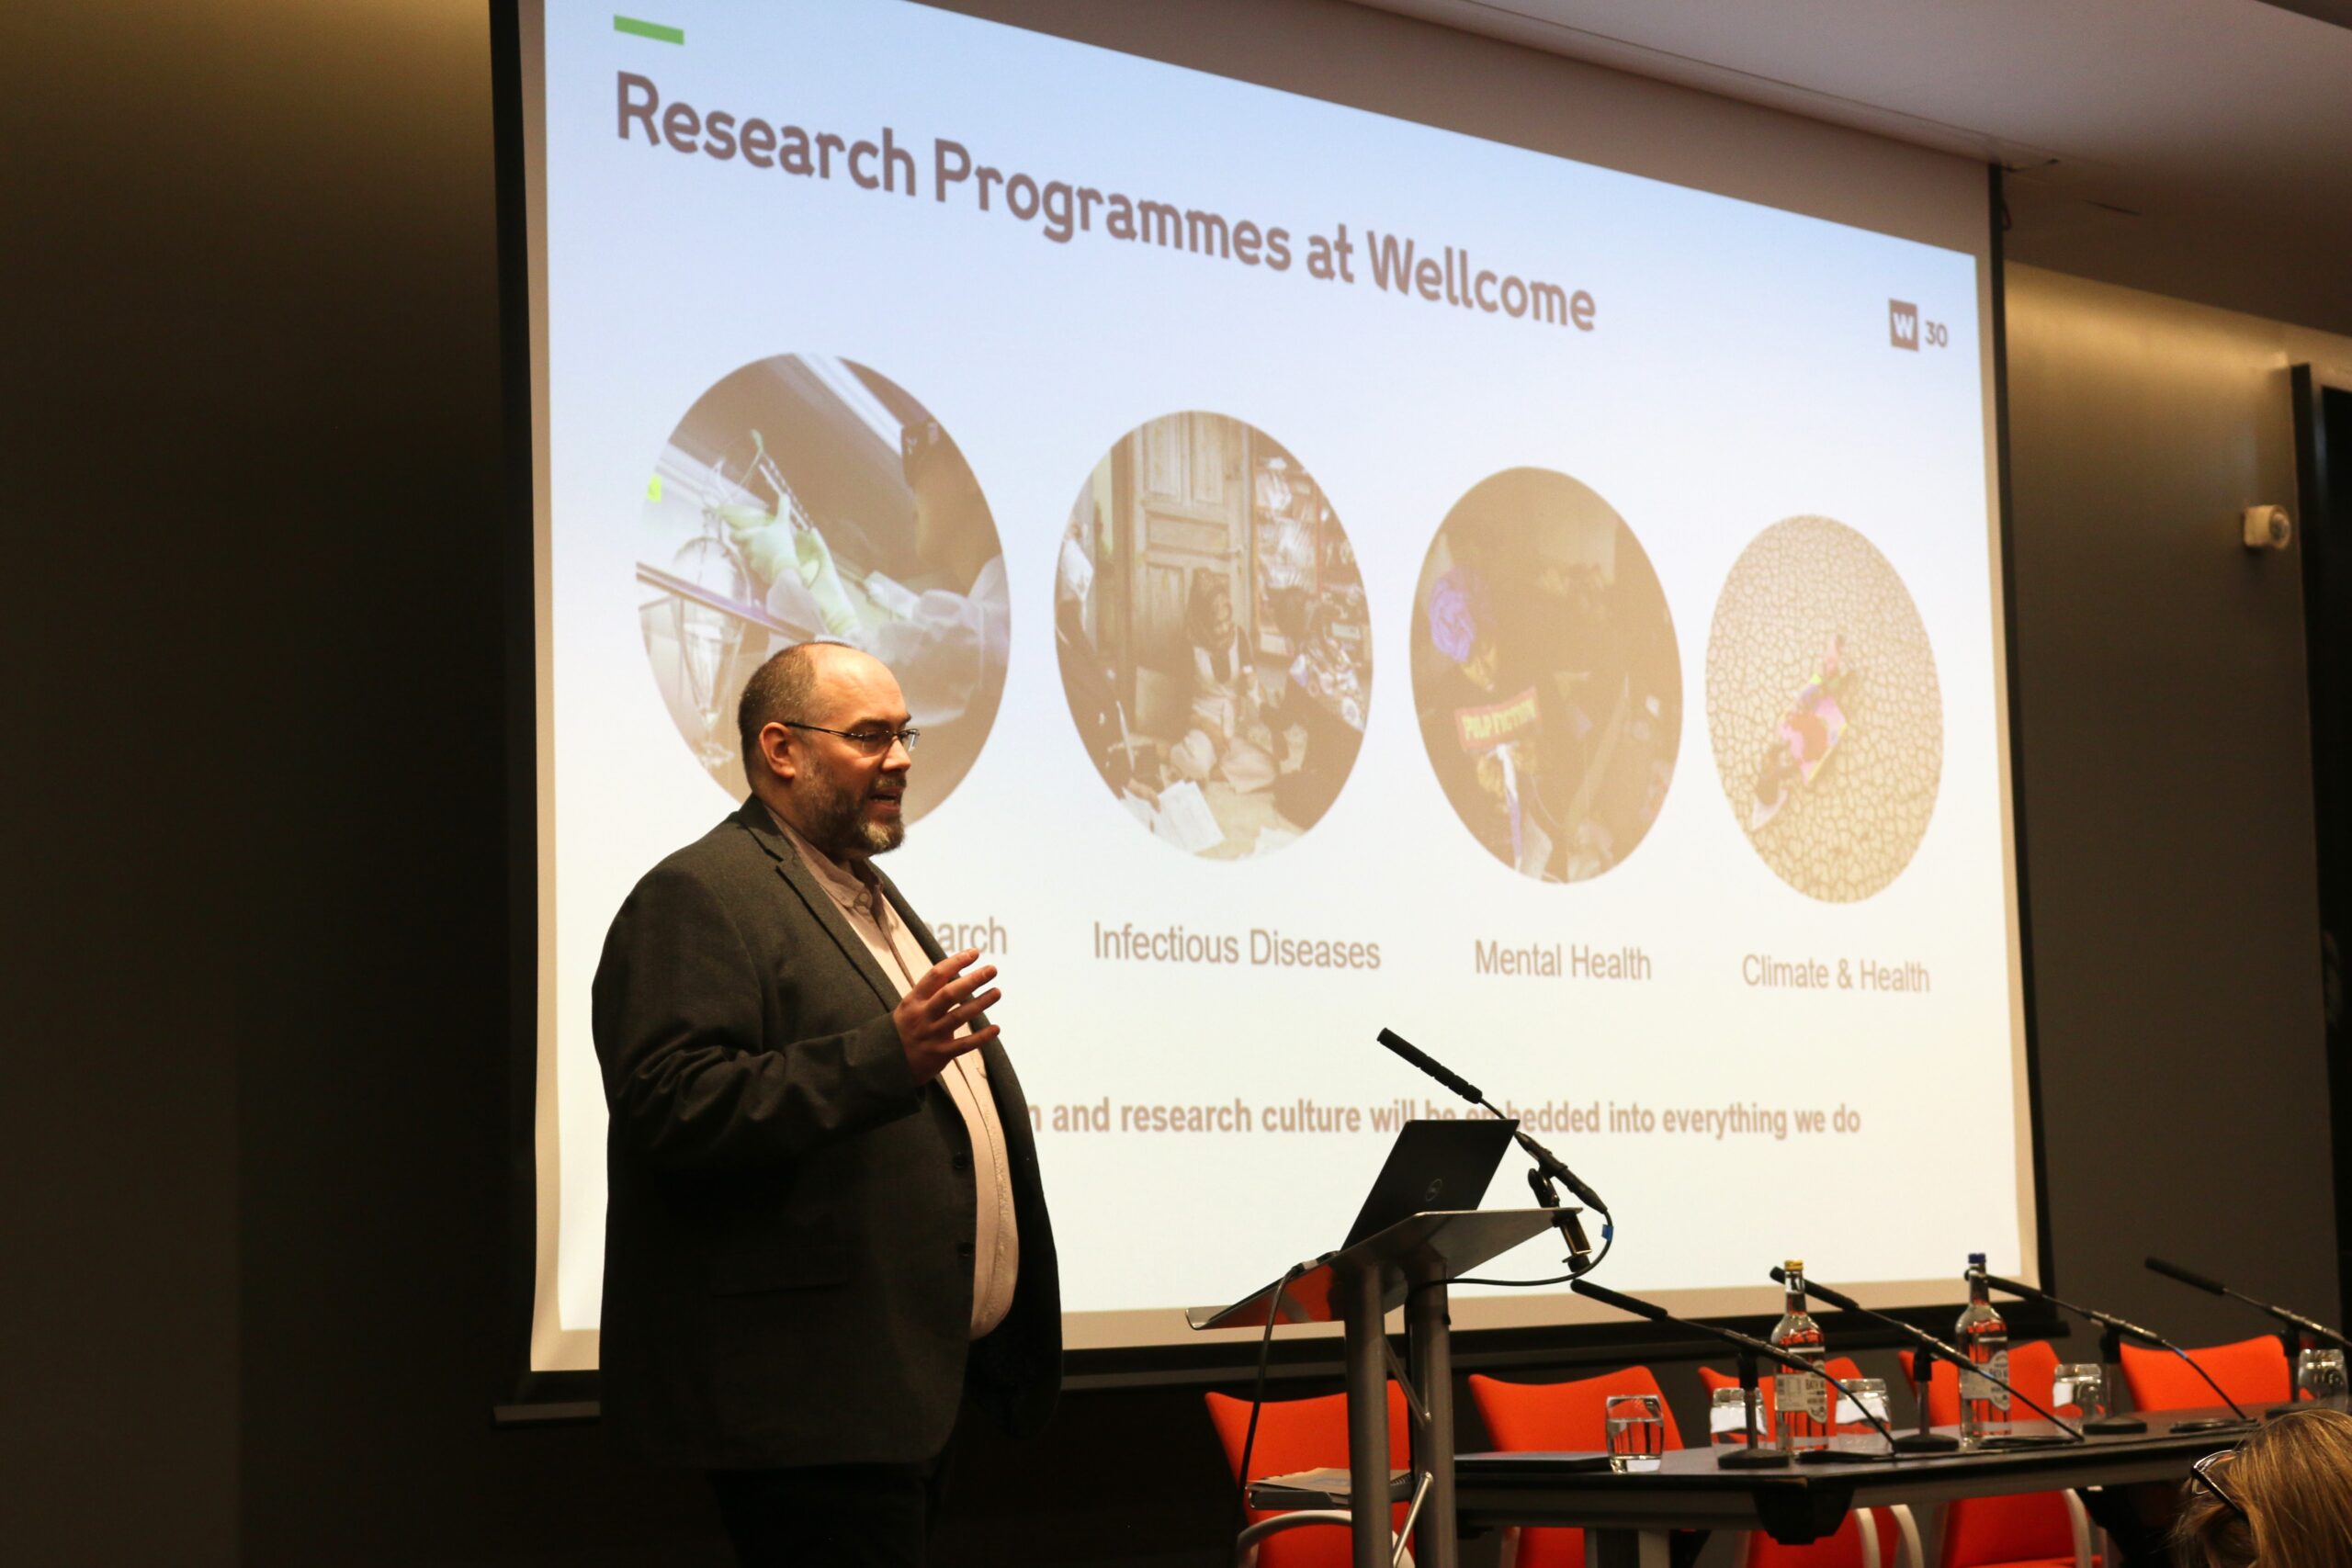 Ben Murton of Wellcome Disovery Research Delivers his presentation at the Wellcome event